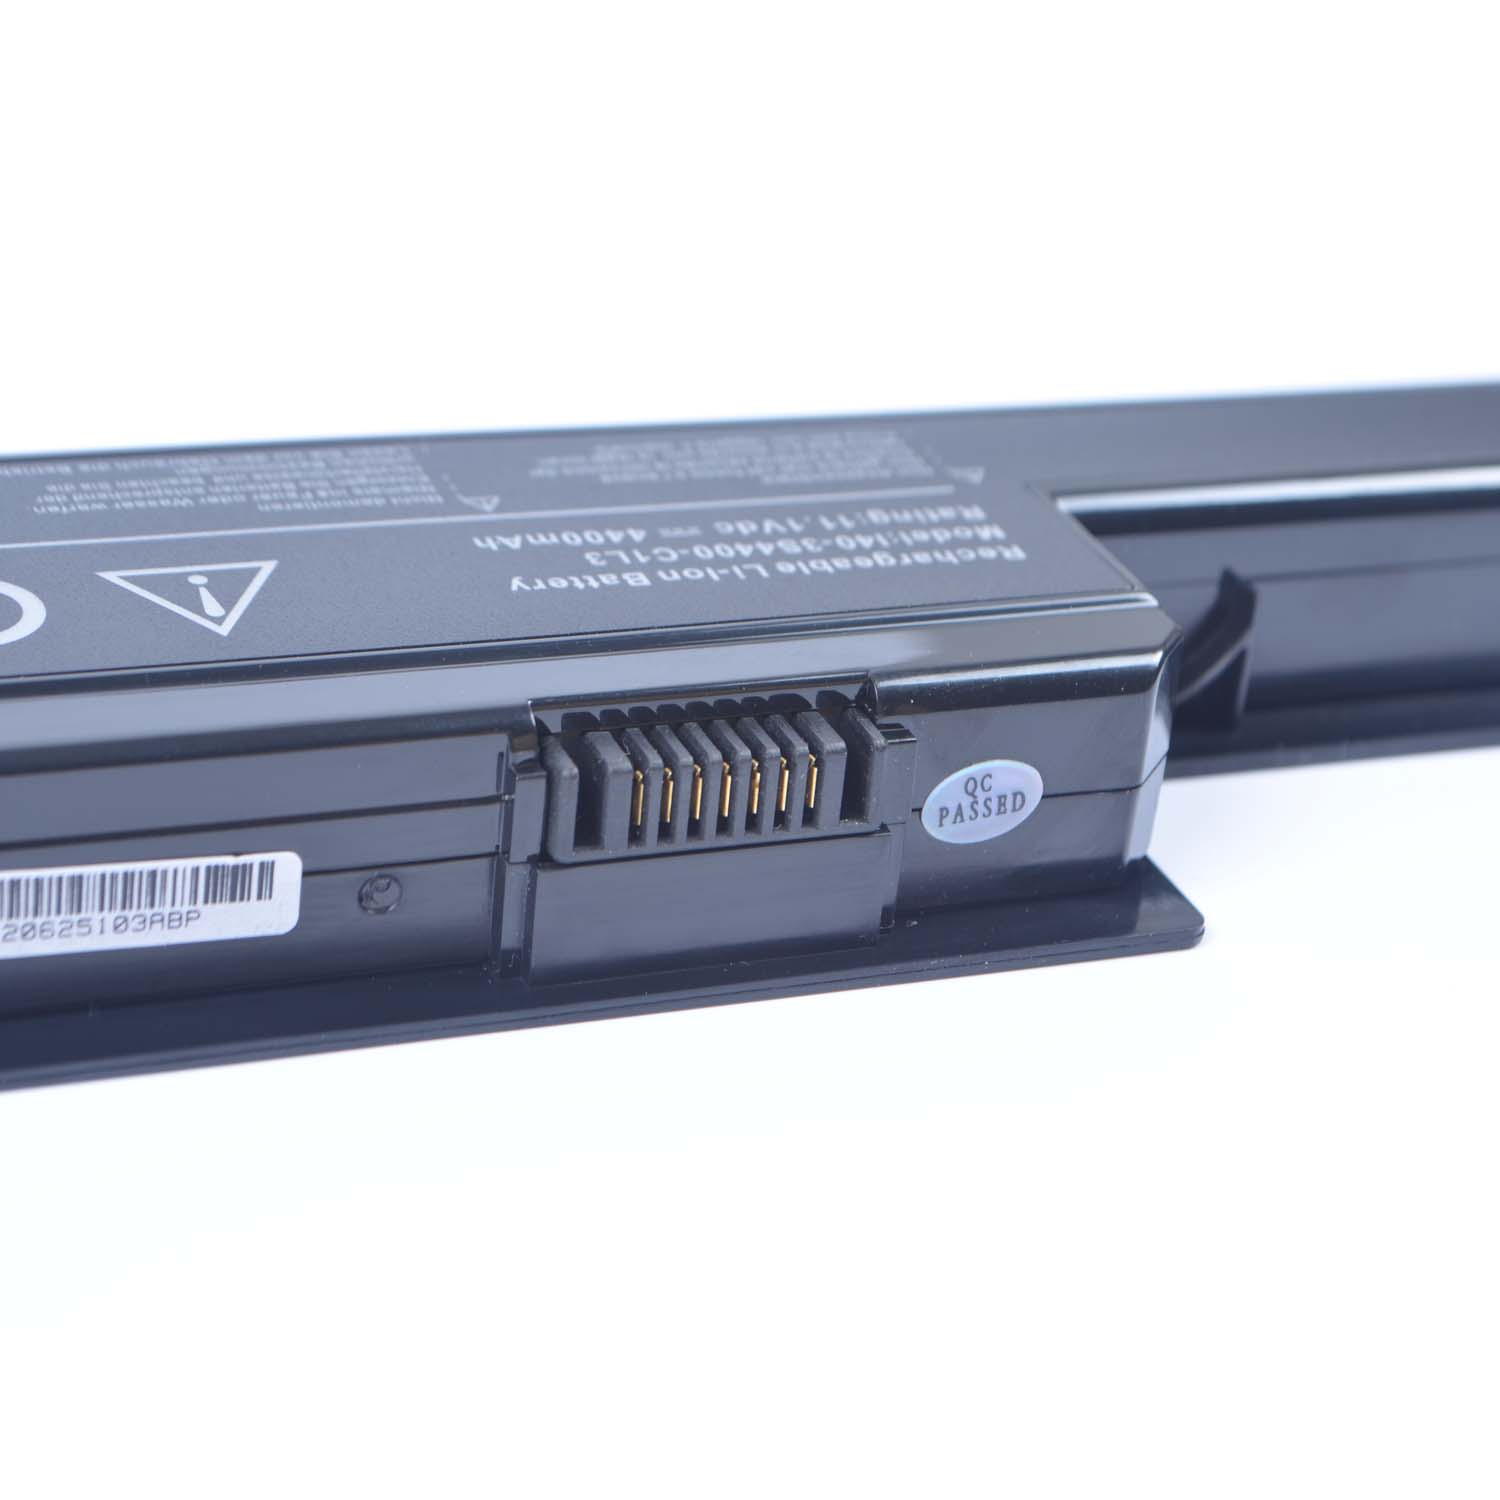 FOUNDER FOUNDER R410SU-T340Z battery